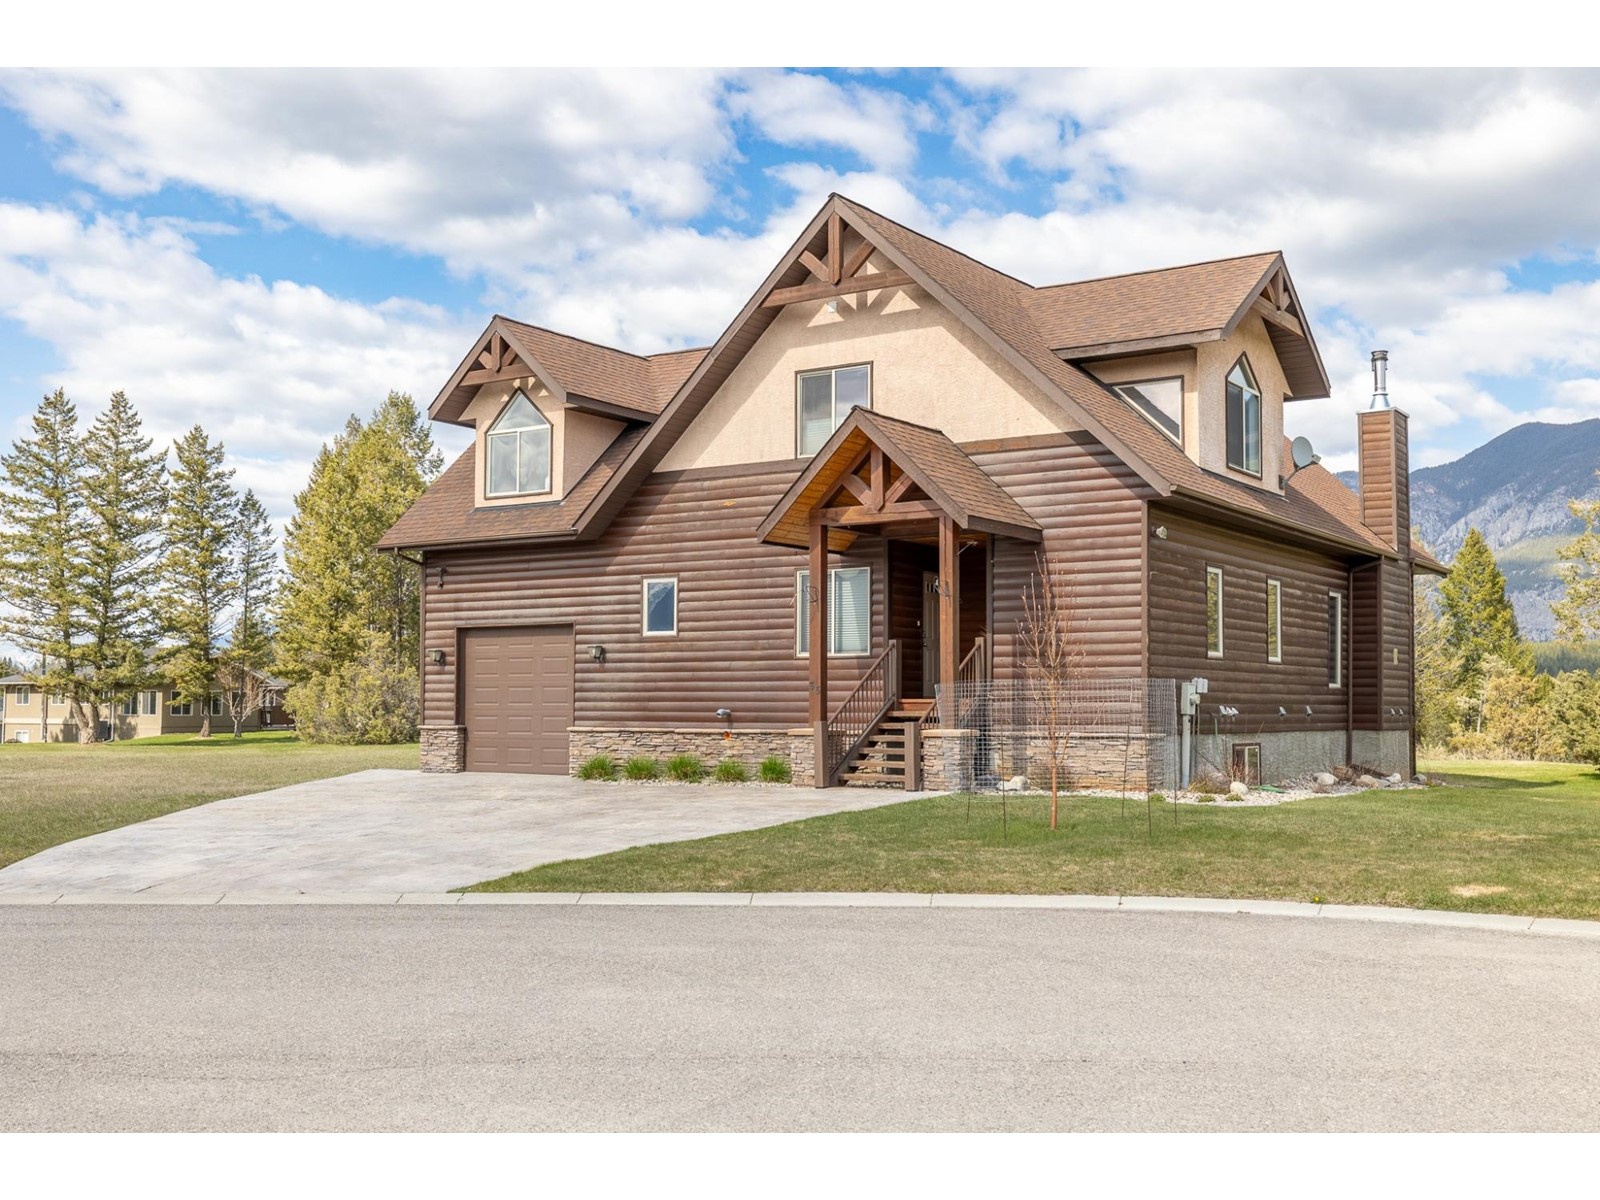 33 - 640 UPPER LAKEVIEW ROAD, Invermere